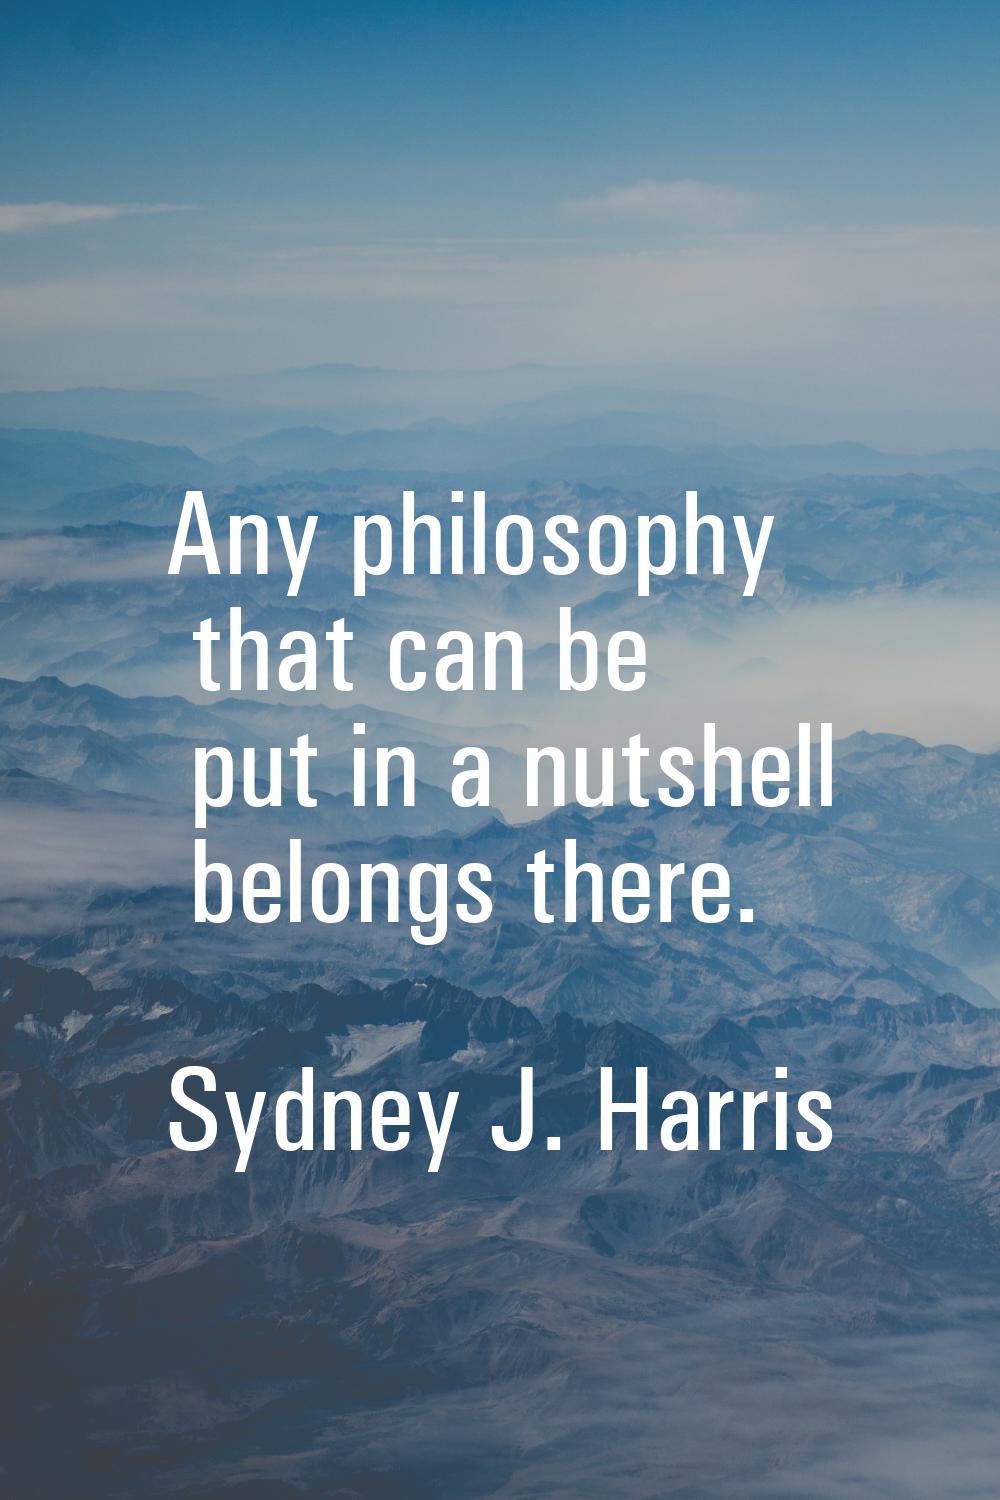 Any philosophy that can be put in a nutshell belongs there.